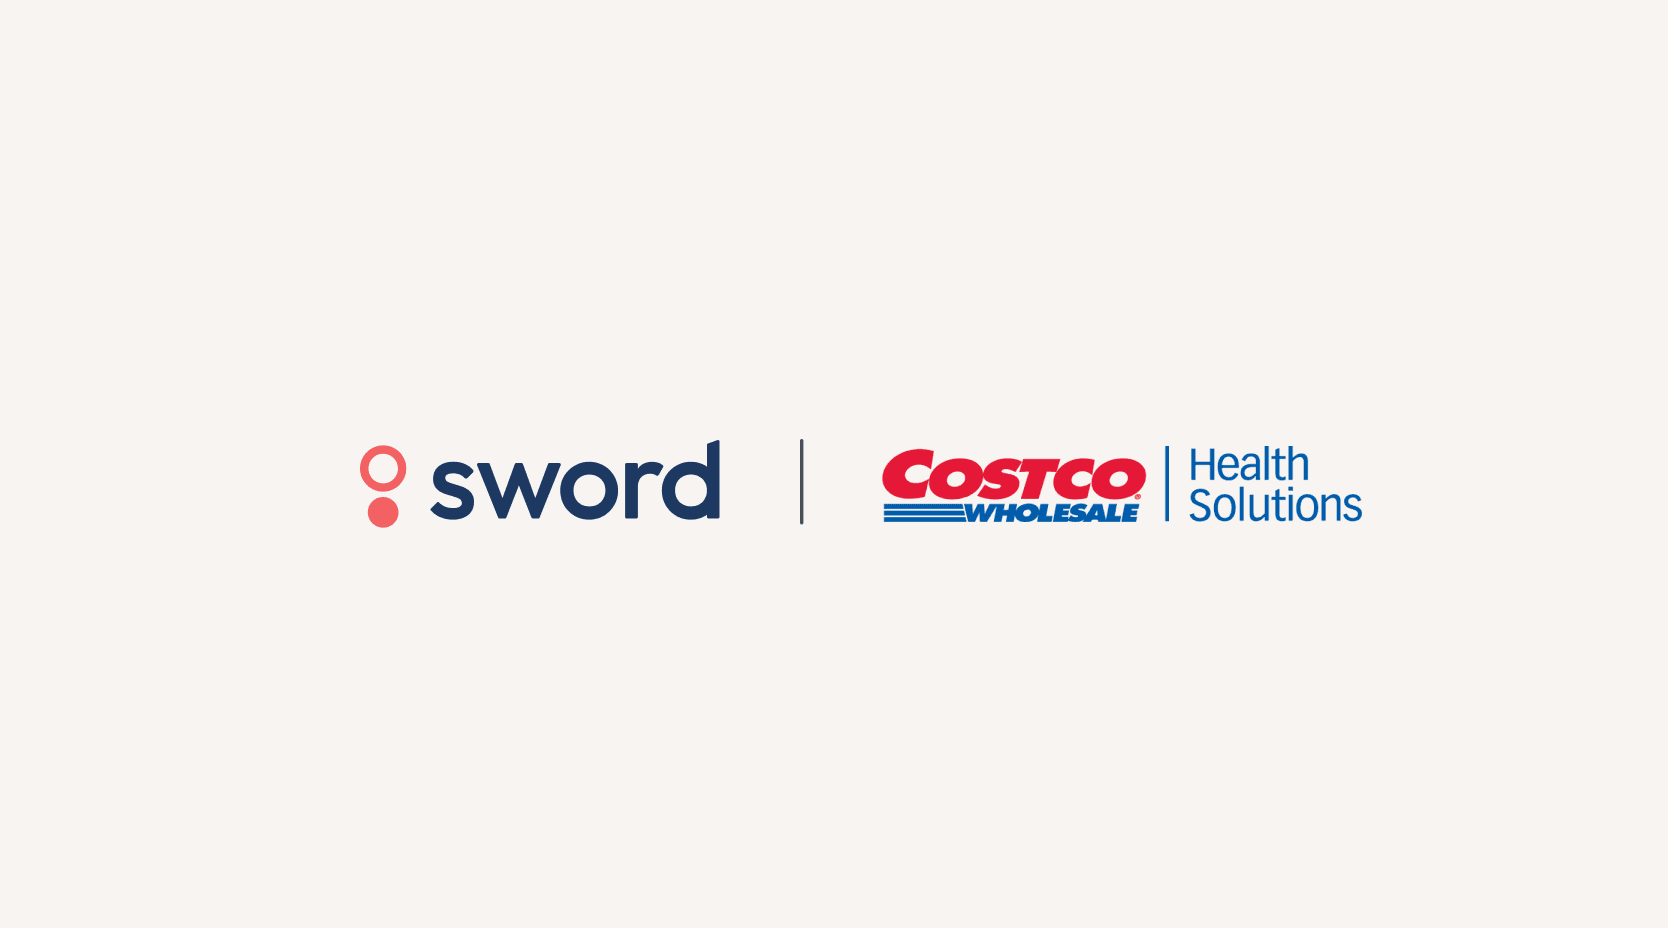 Sword partners with Costco Health Solutions